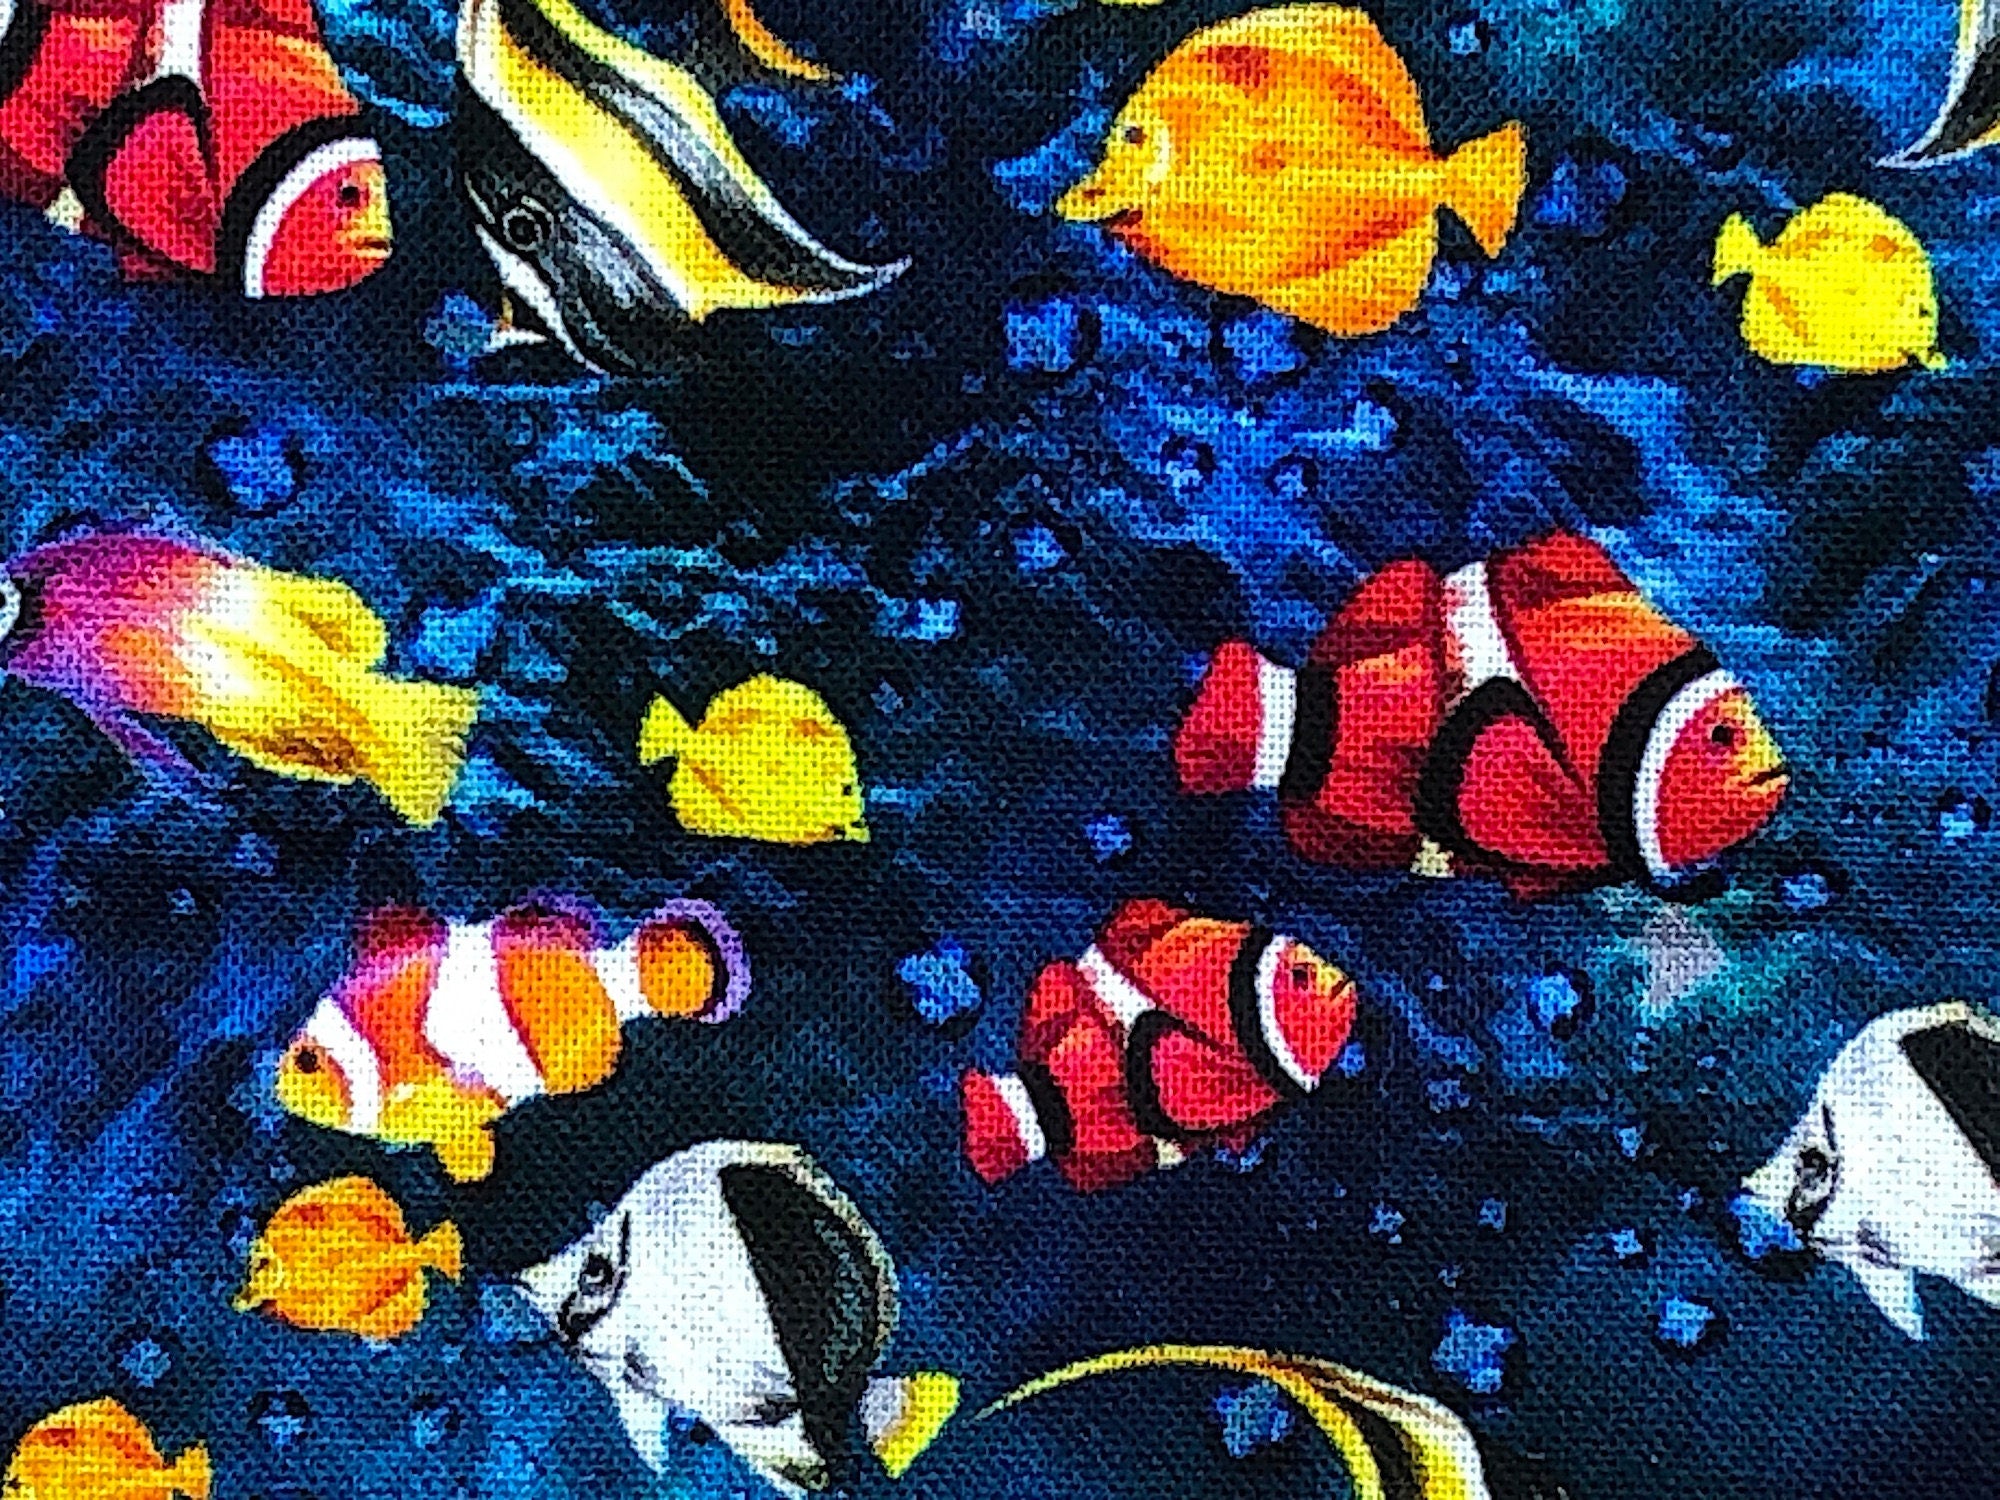 This fabric is part of the Reef Collection and is covered with angel fish, clown fish, yellow tang fish, and more on a water background.